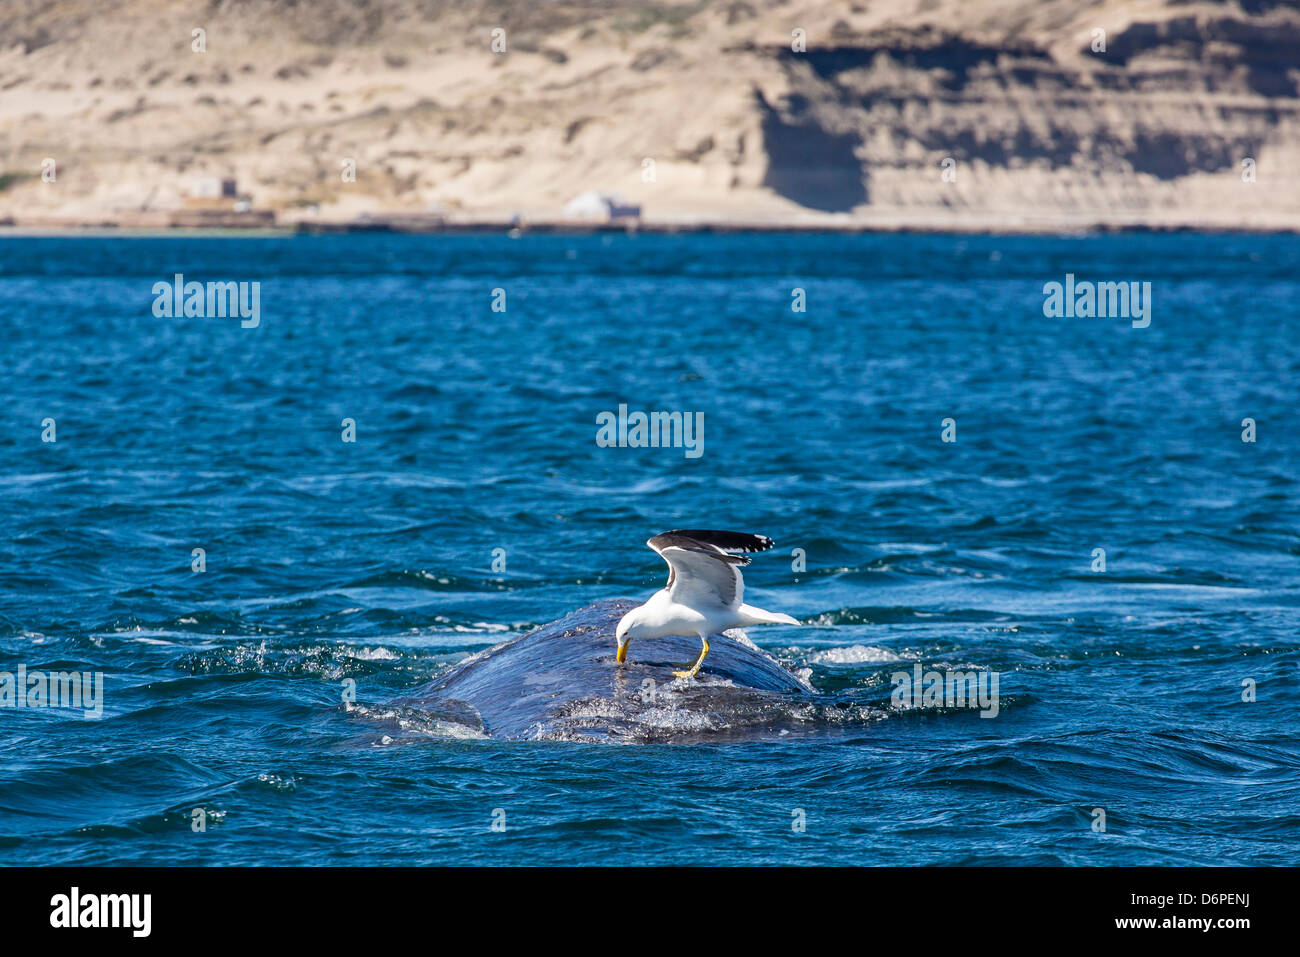 Southern right whale (Eubalaena australis) being fed upon by kelp gull, Golfo Nuevo, Peninsula Valdes, Argentina Stock Photo